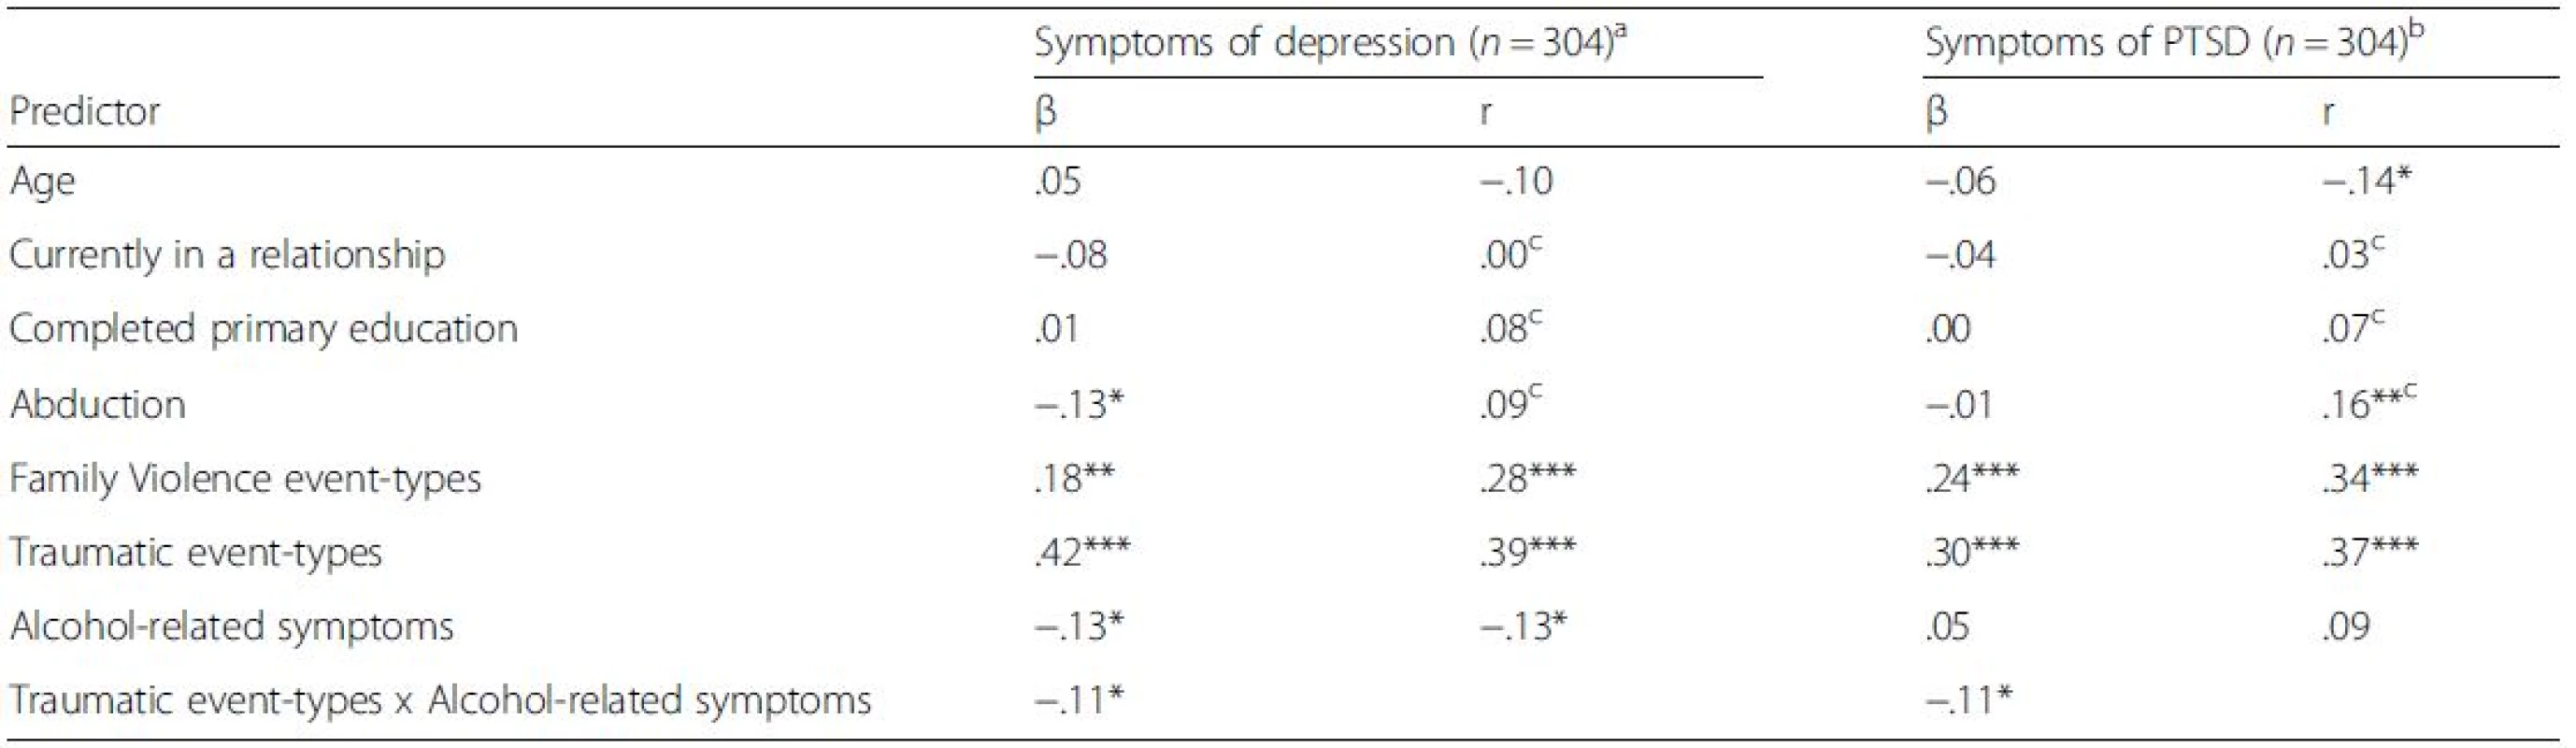 Moderation of the association between traumatic experiences and psychopathology by alcohol-related symptoms